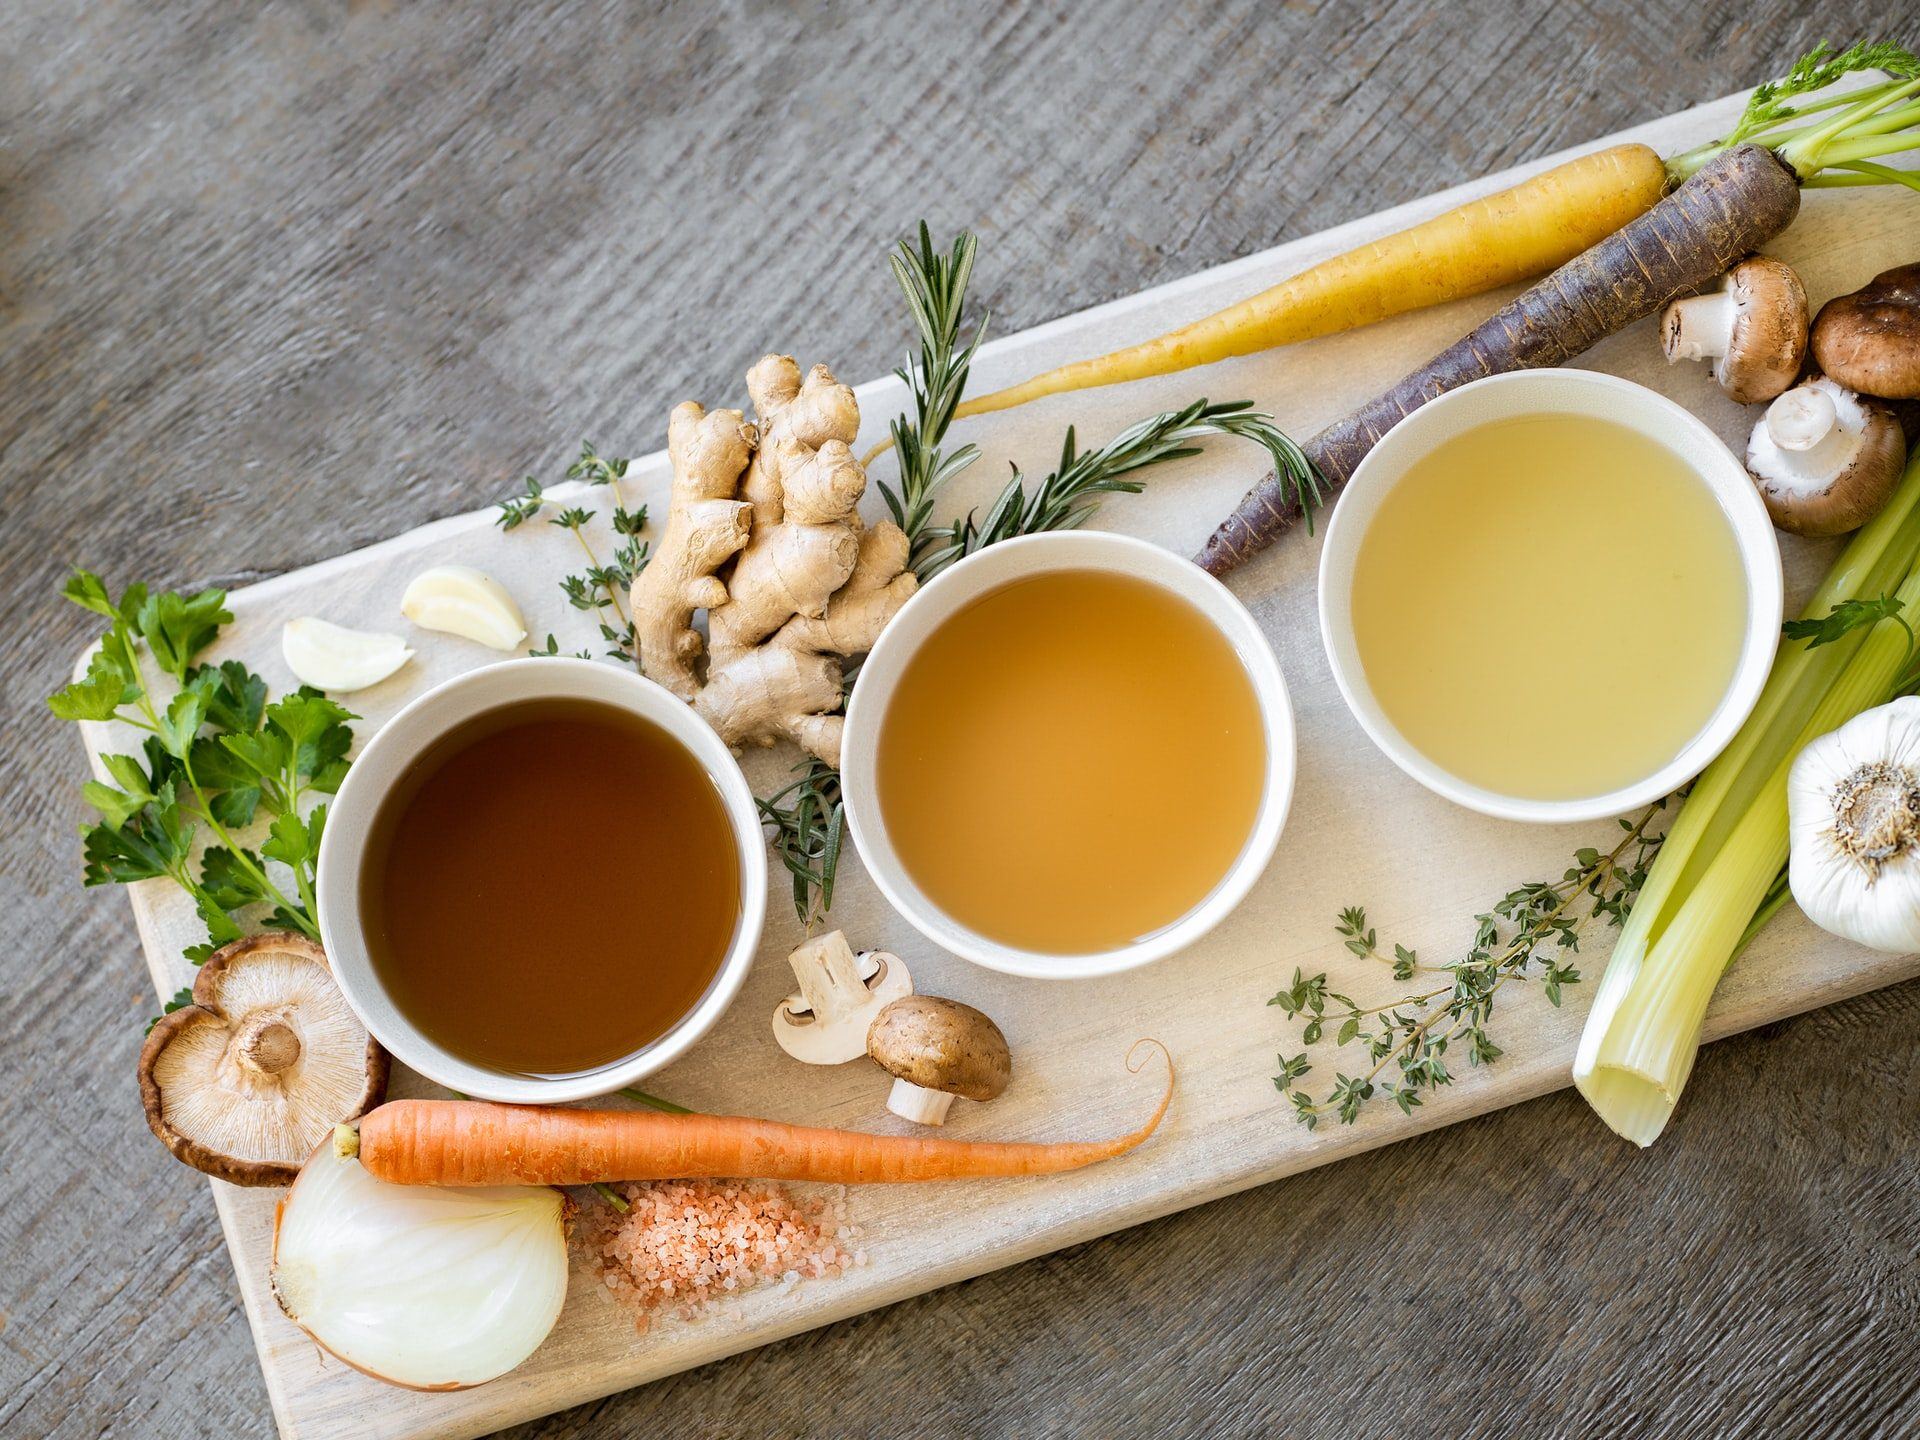 5 Pro Aging Health Benefits of Bone Broth You Need To Know About